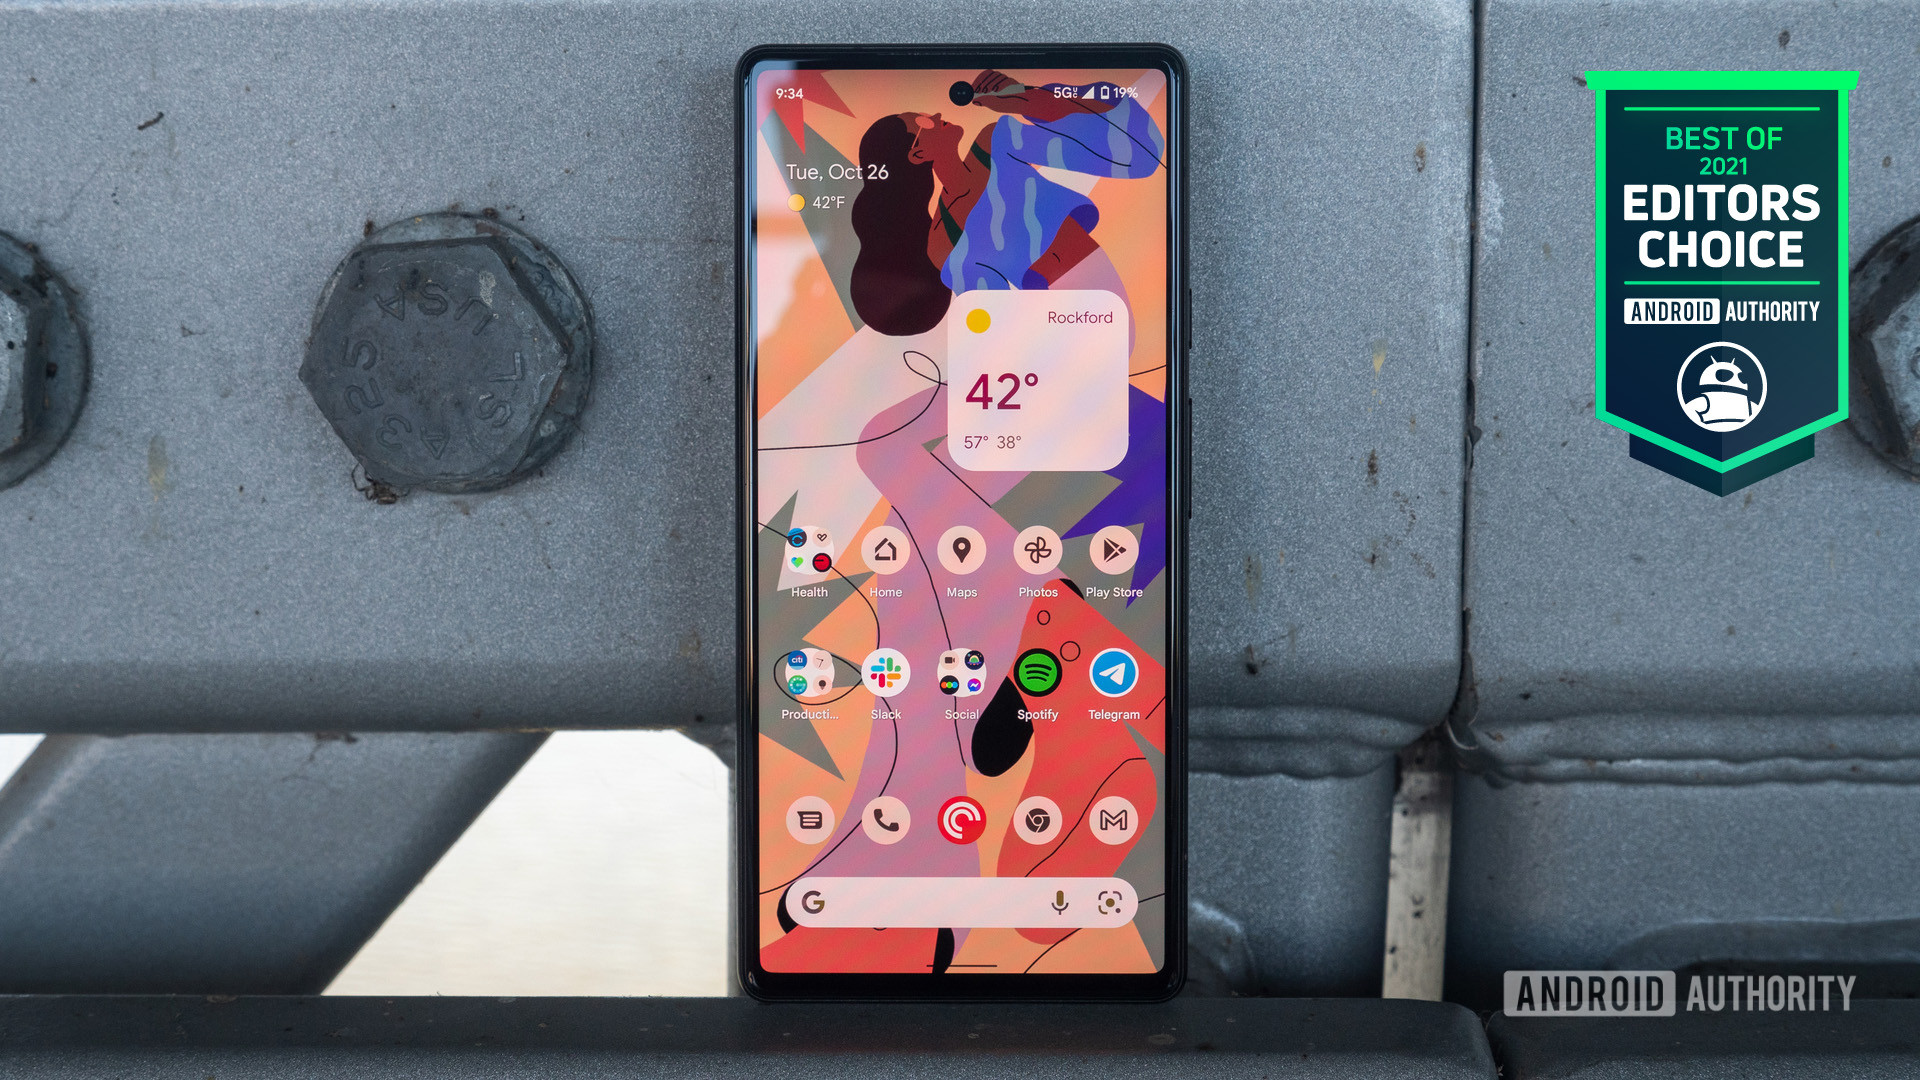 Google Pixel 6 Android Authority 2021 Editors' Choice